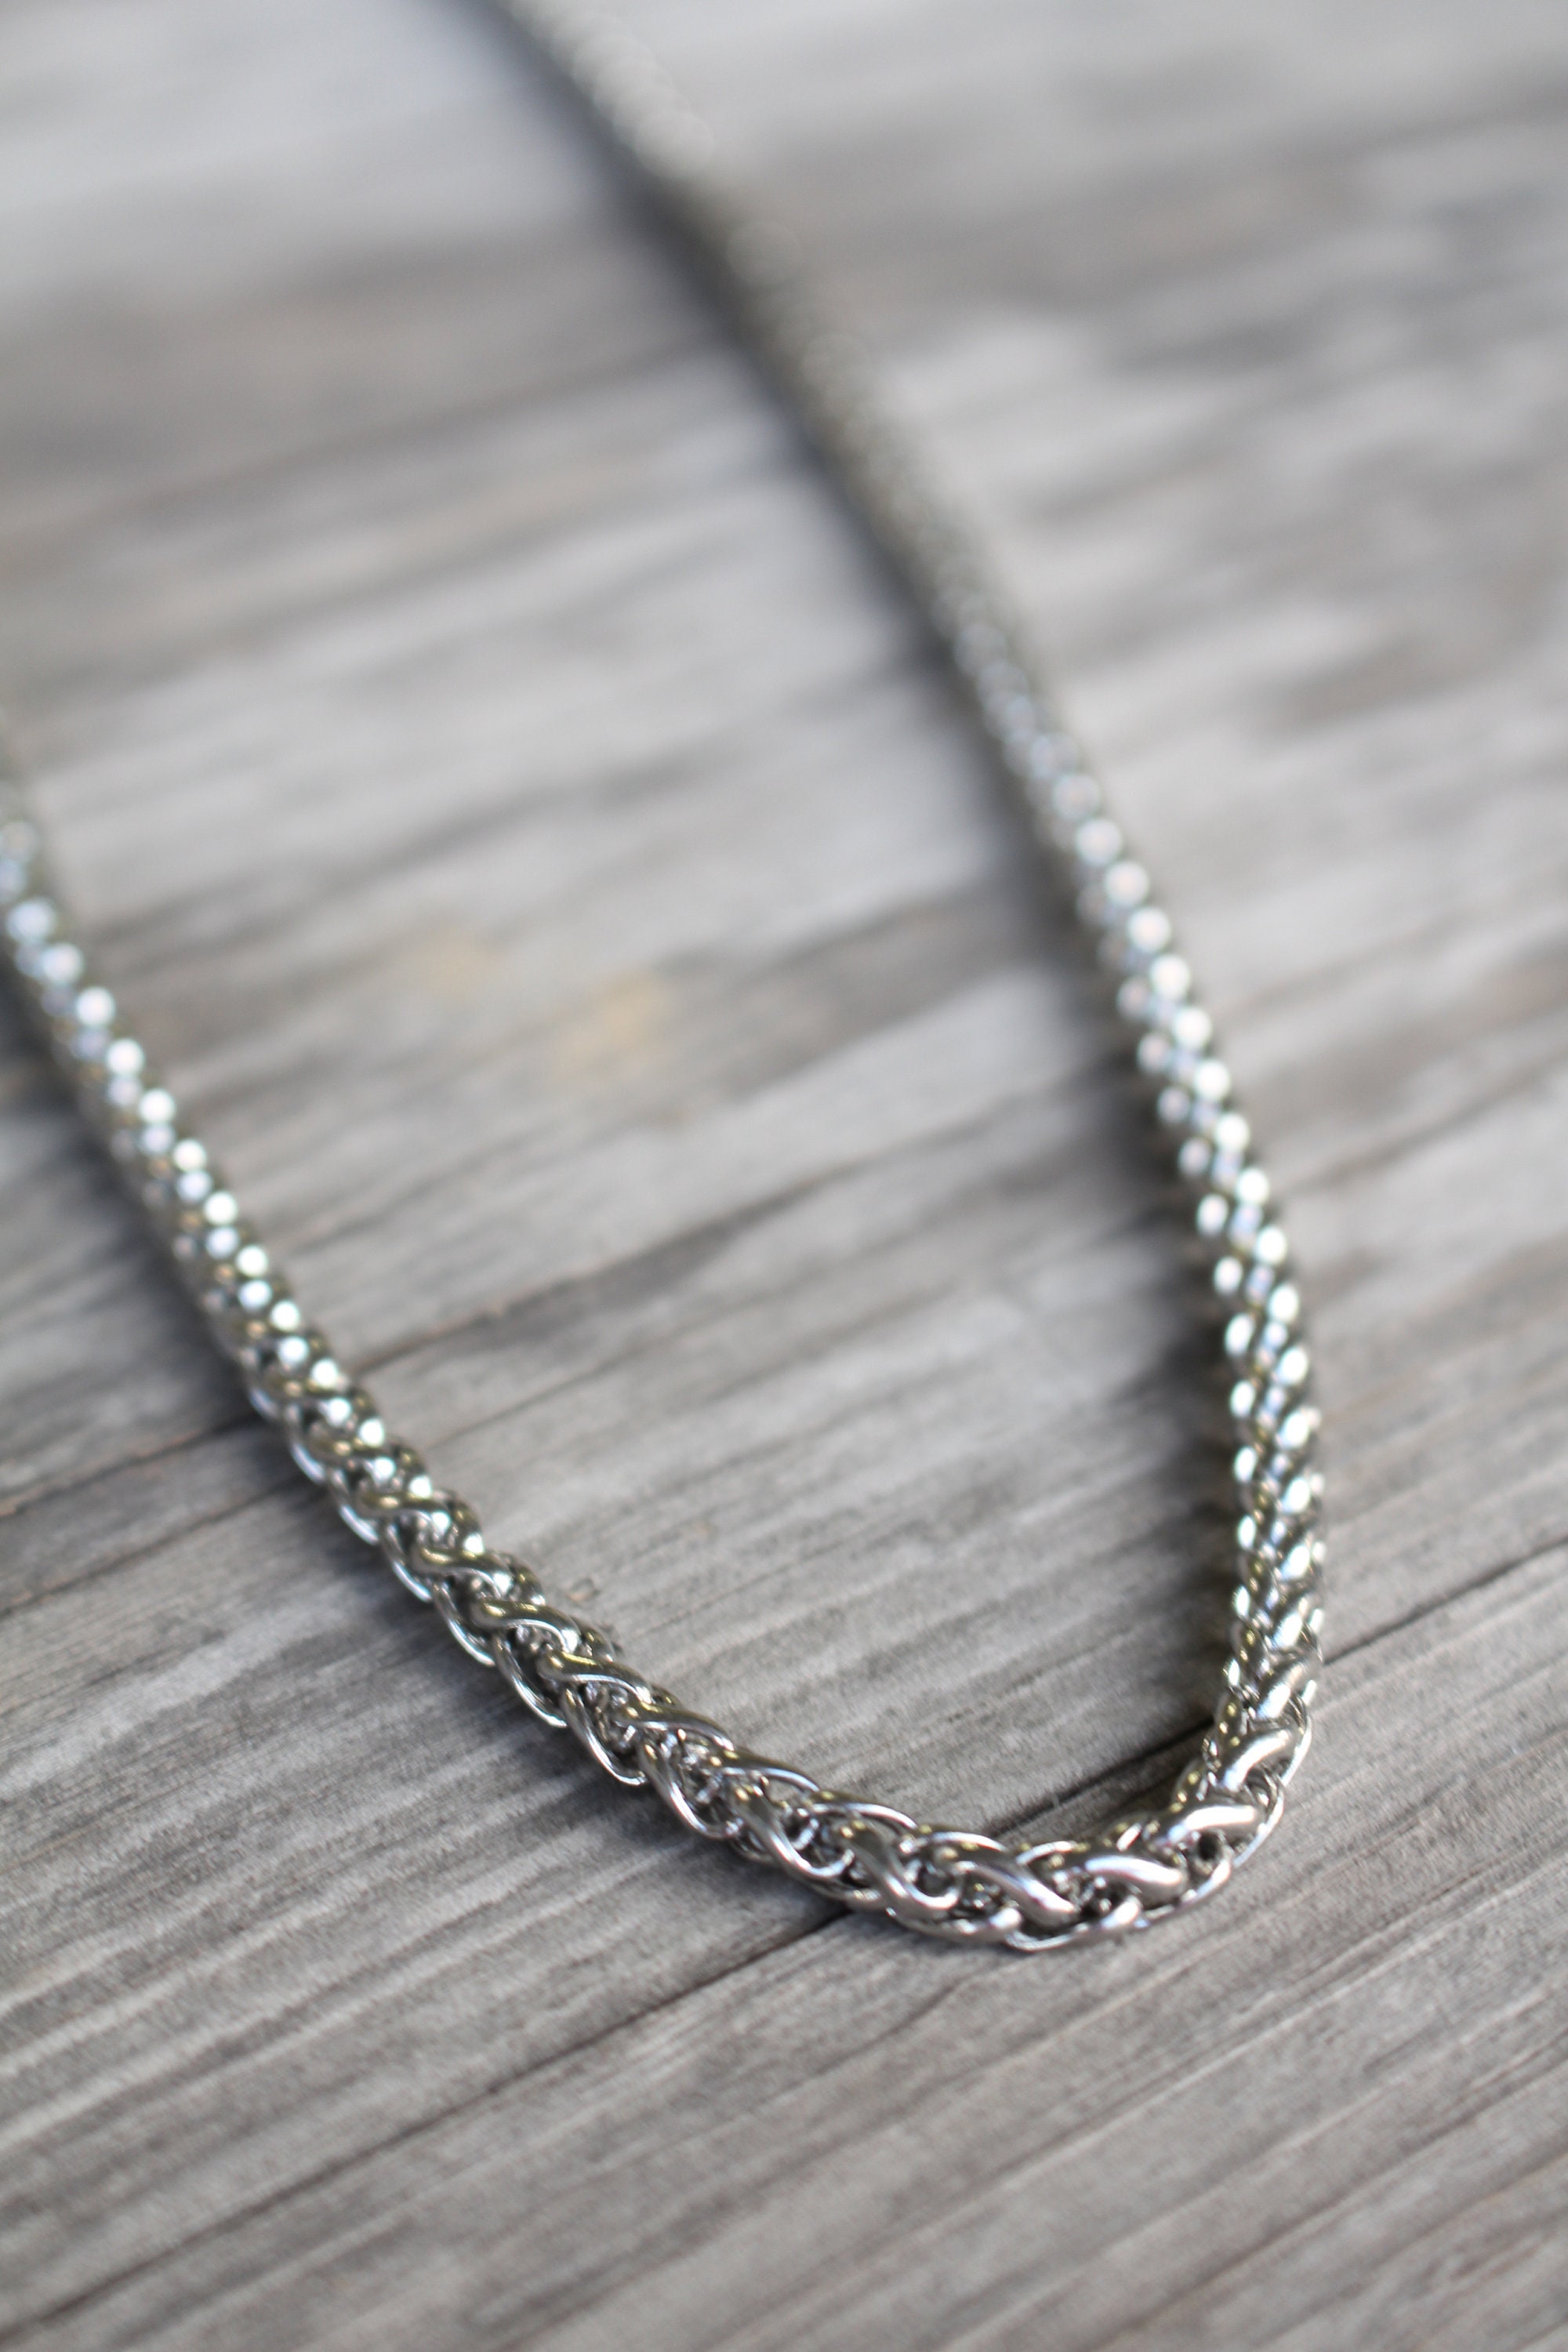 Titanium Kay FIRMATO Stainless Steel Mens Link Necklace Chain Length 16-40